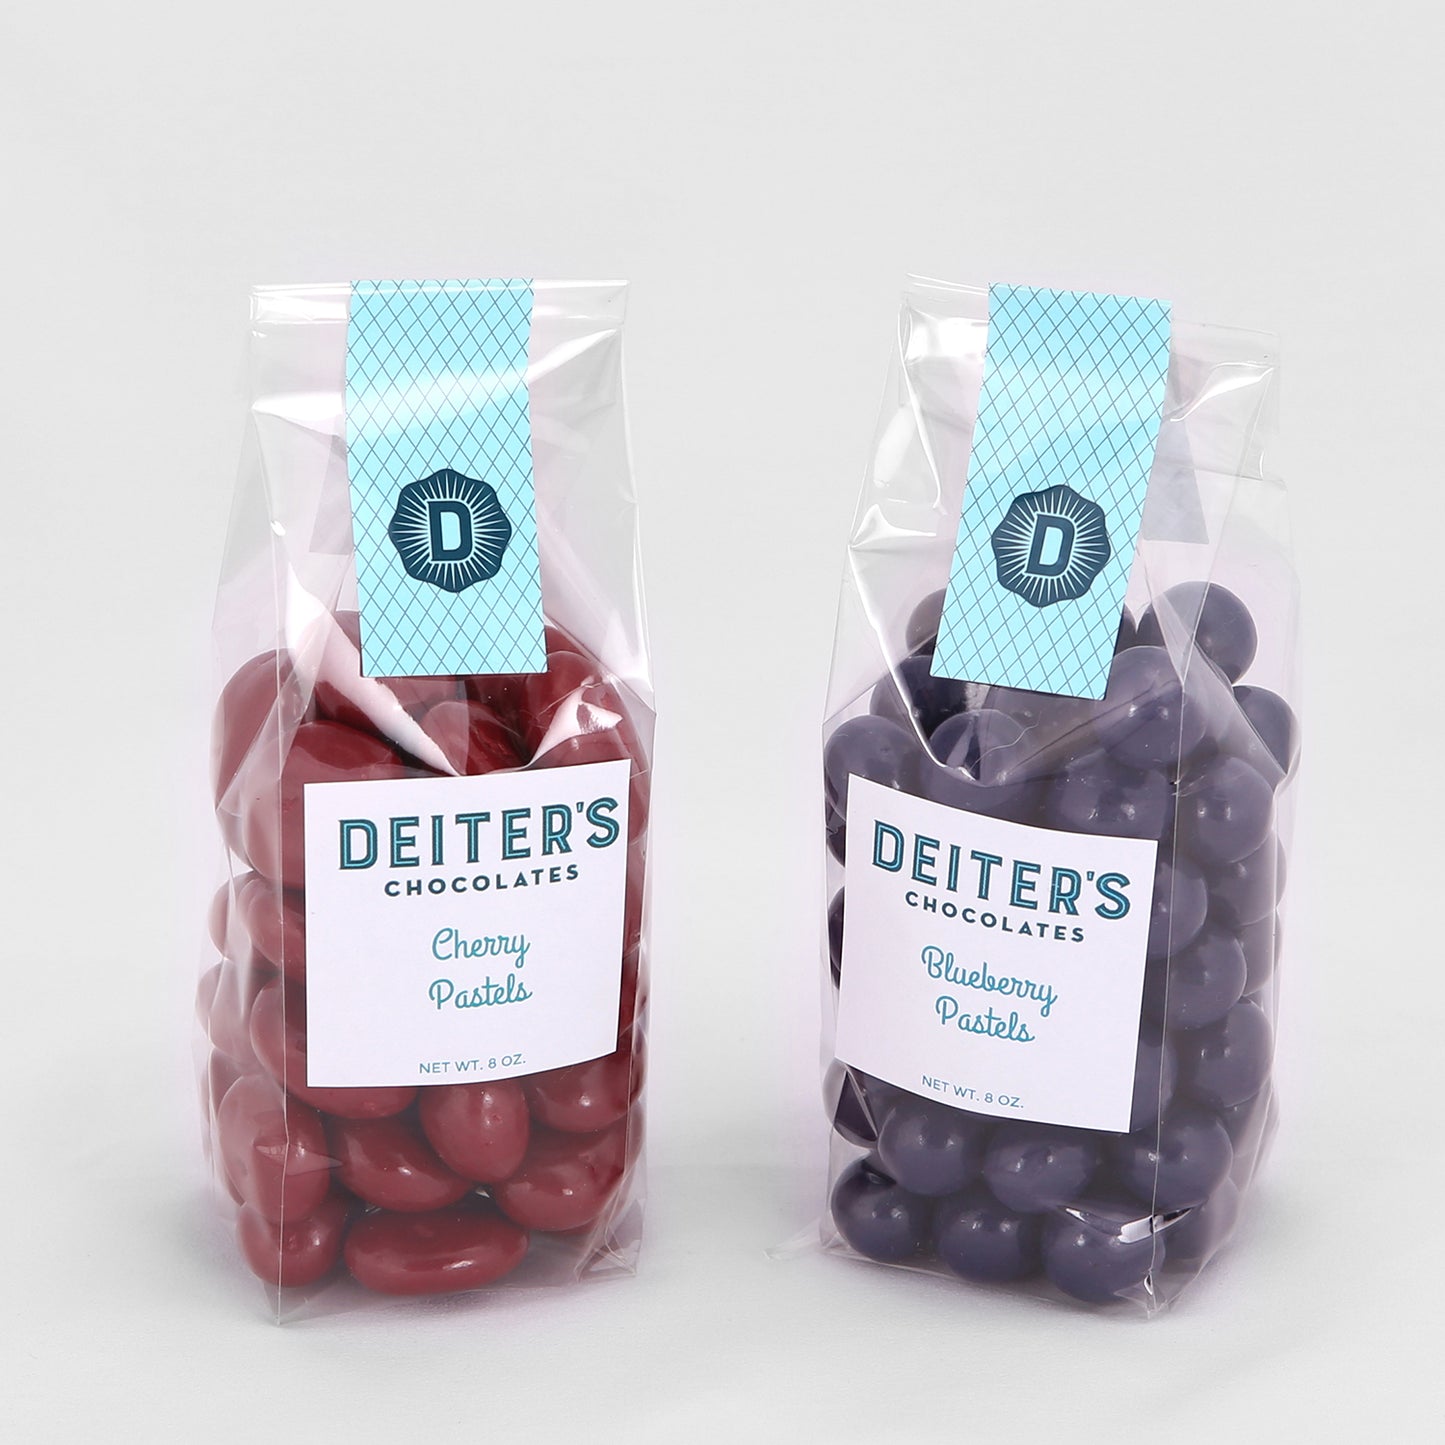 bags of cherry and blueberry pastel candies.